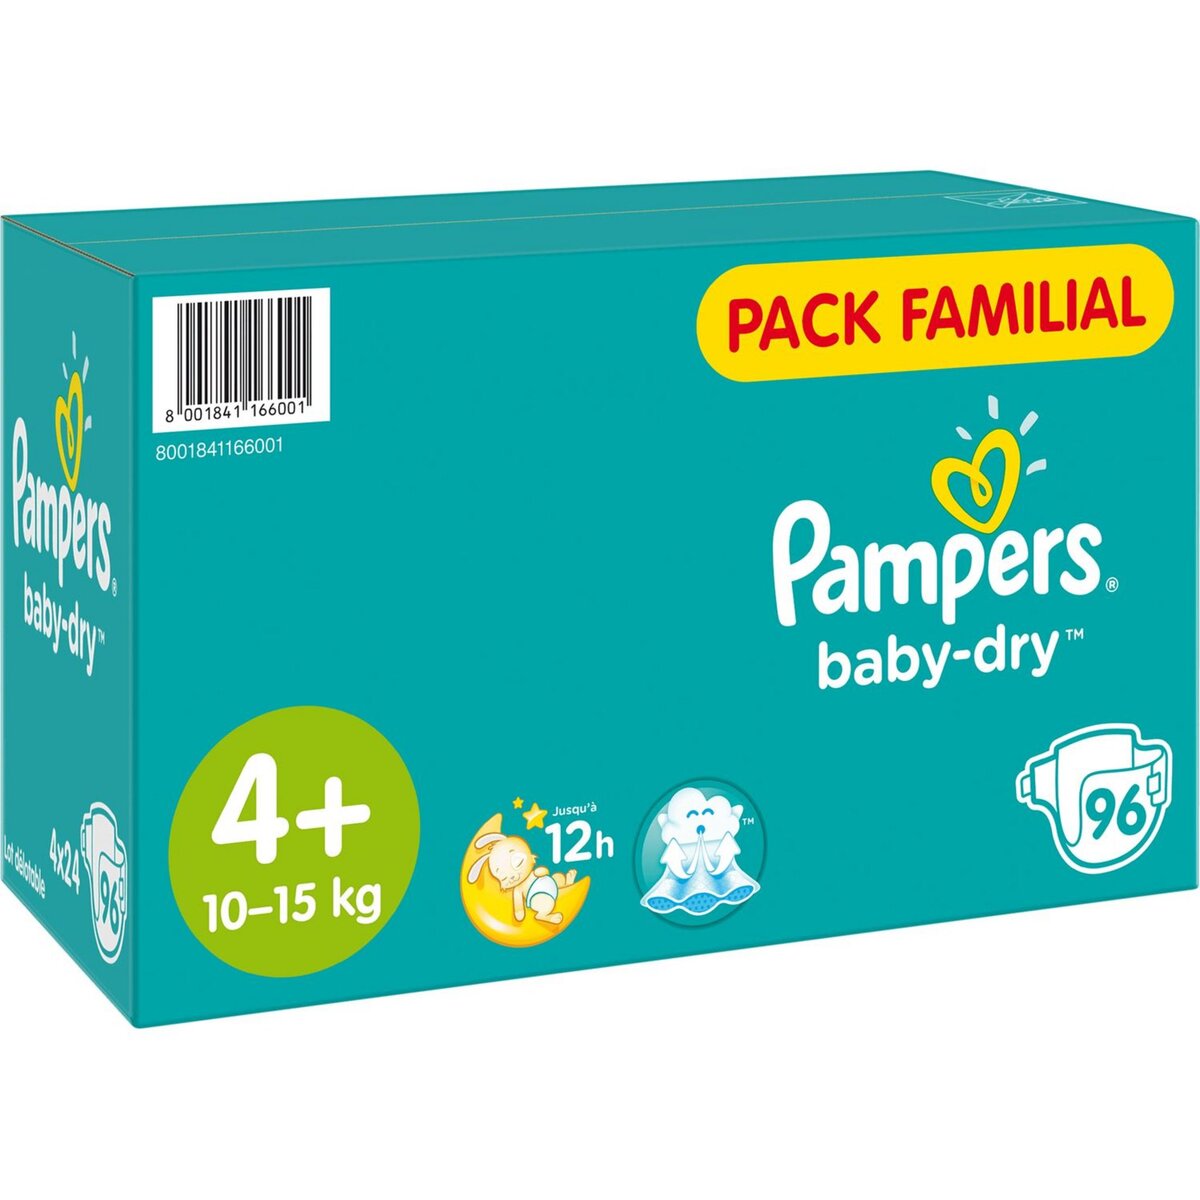 PAMPERS Pampers Baby-dry couches pack familial taille 4+ (10-15kg) x96 96 couches